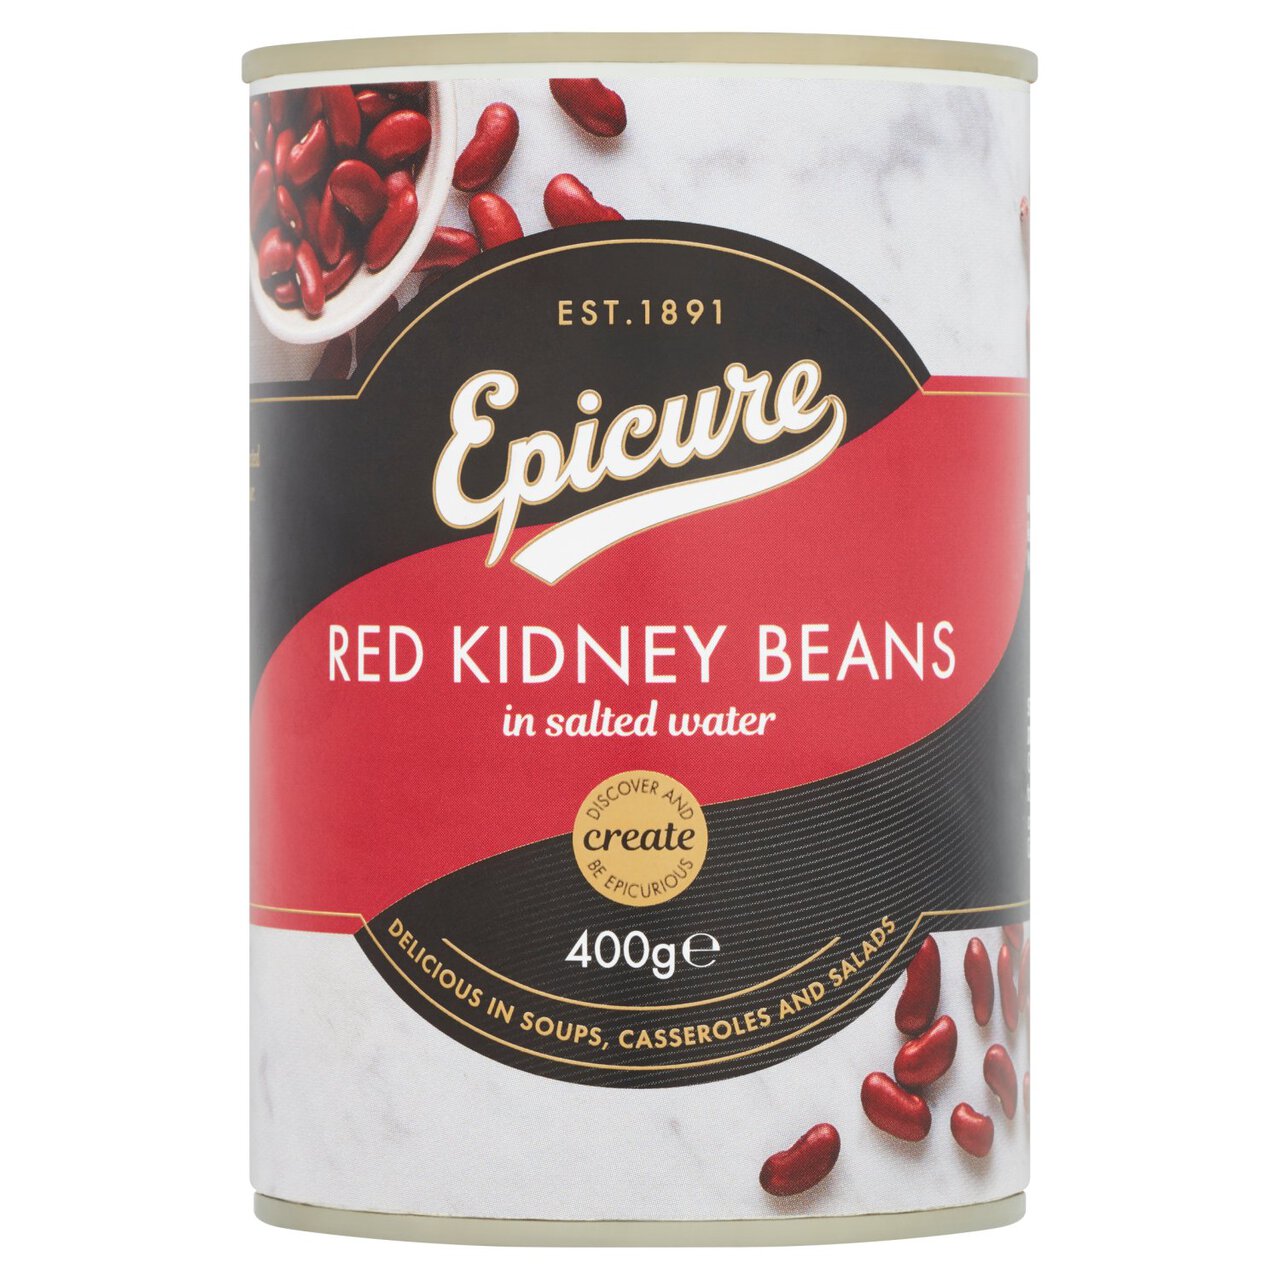 Epicure Red Kidney Beans 400g